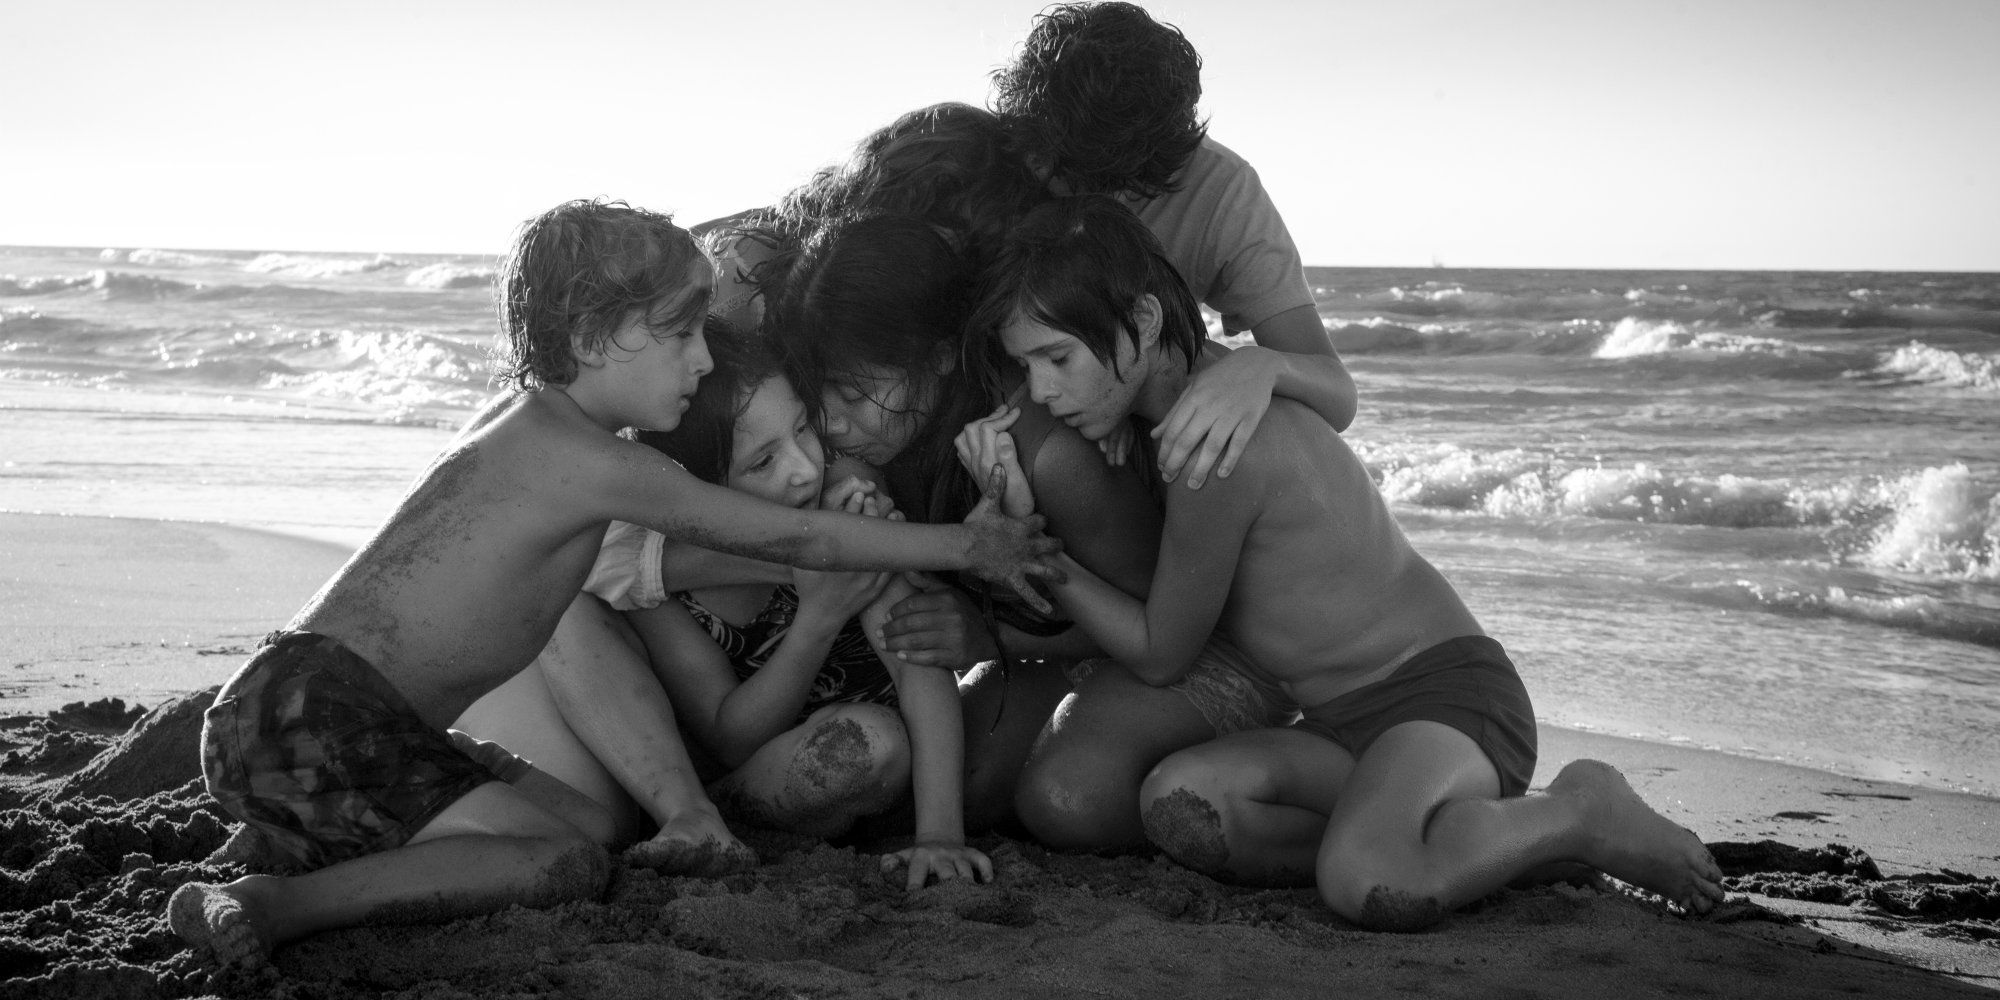 Roma 2018 movie young cast